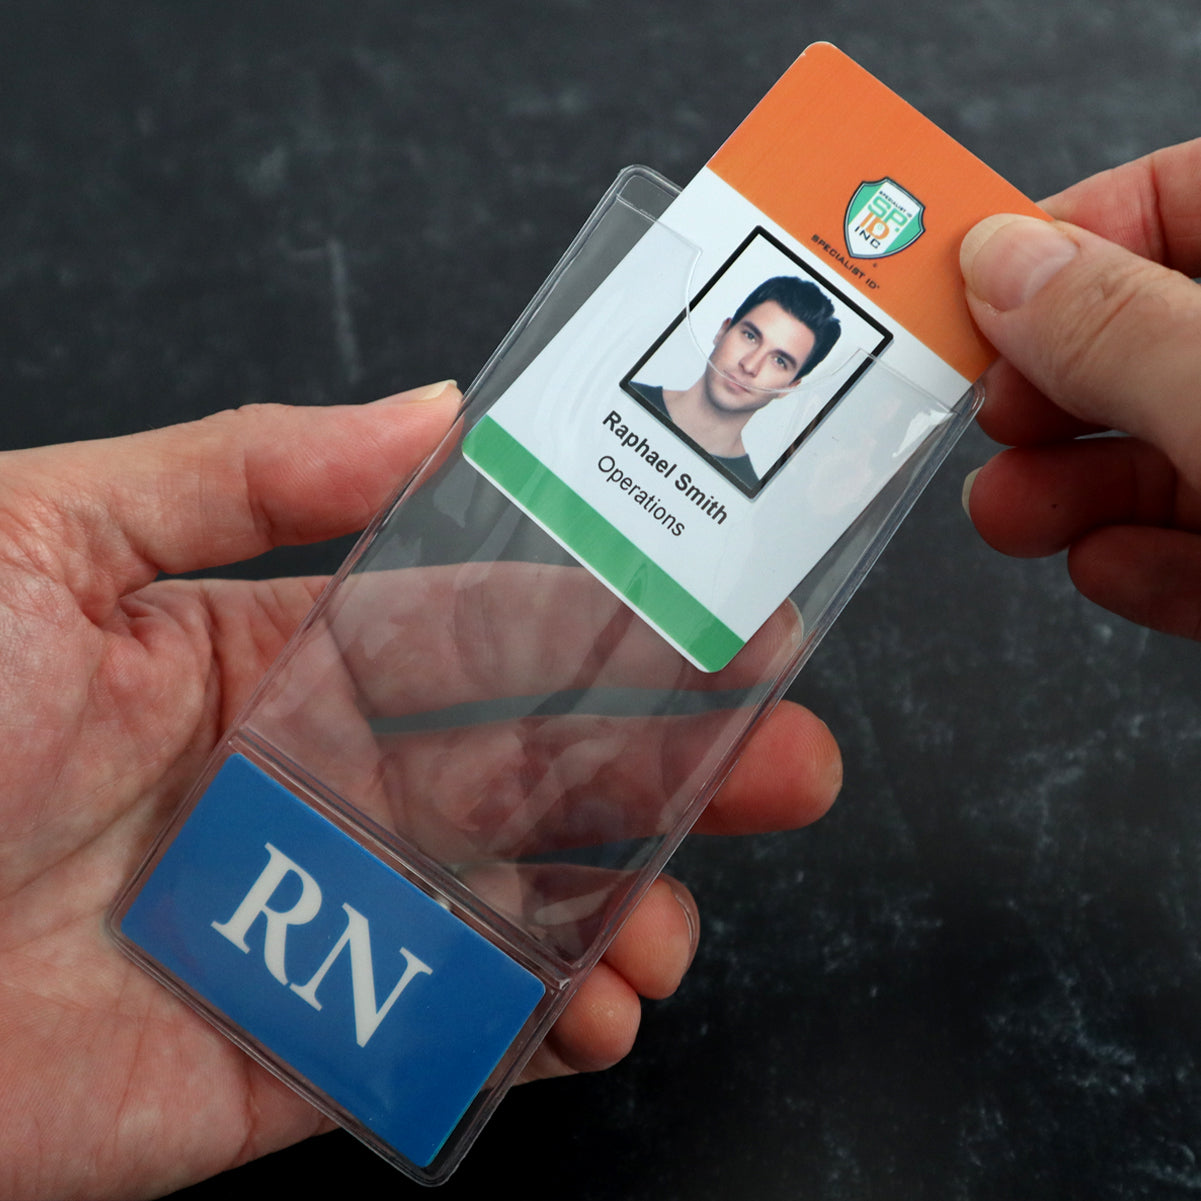 A person is inserting a badge with a photo and the text "Raphael Smith, Operations" into a Custom Printed BadgeBottoms® Vertical (Badge Holder & Badge Buddy IN ONE!!) labeled "RN.